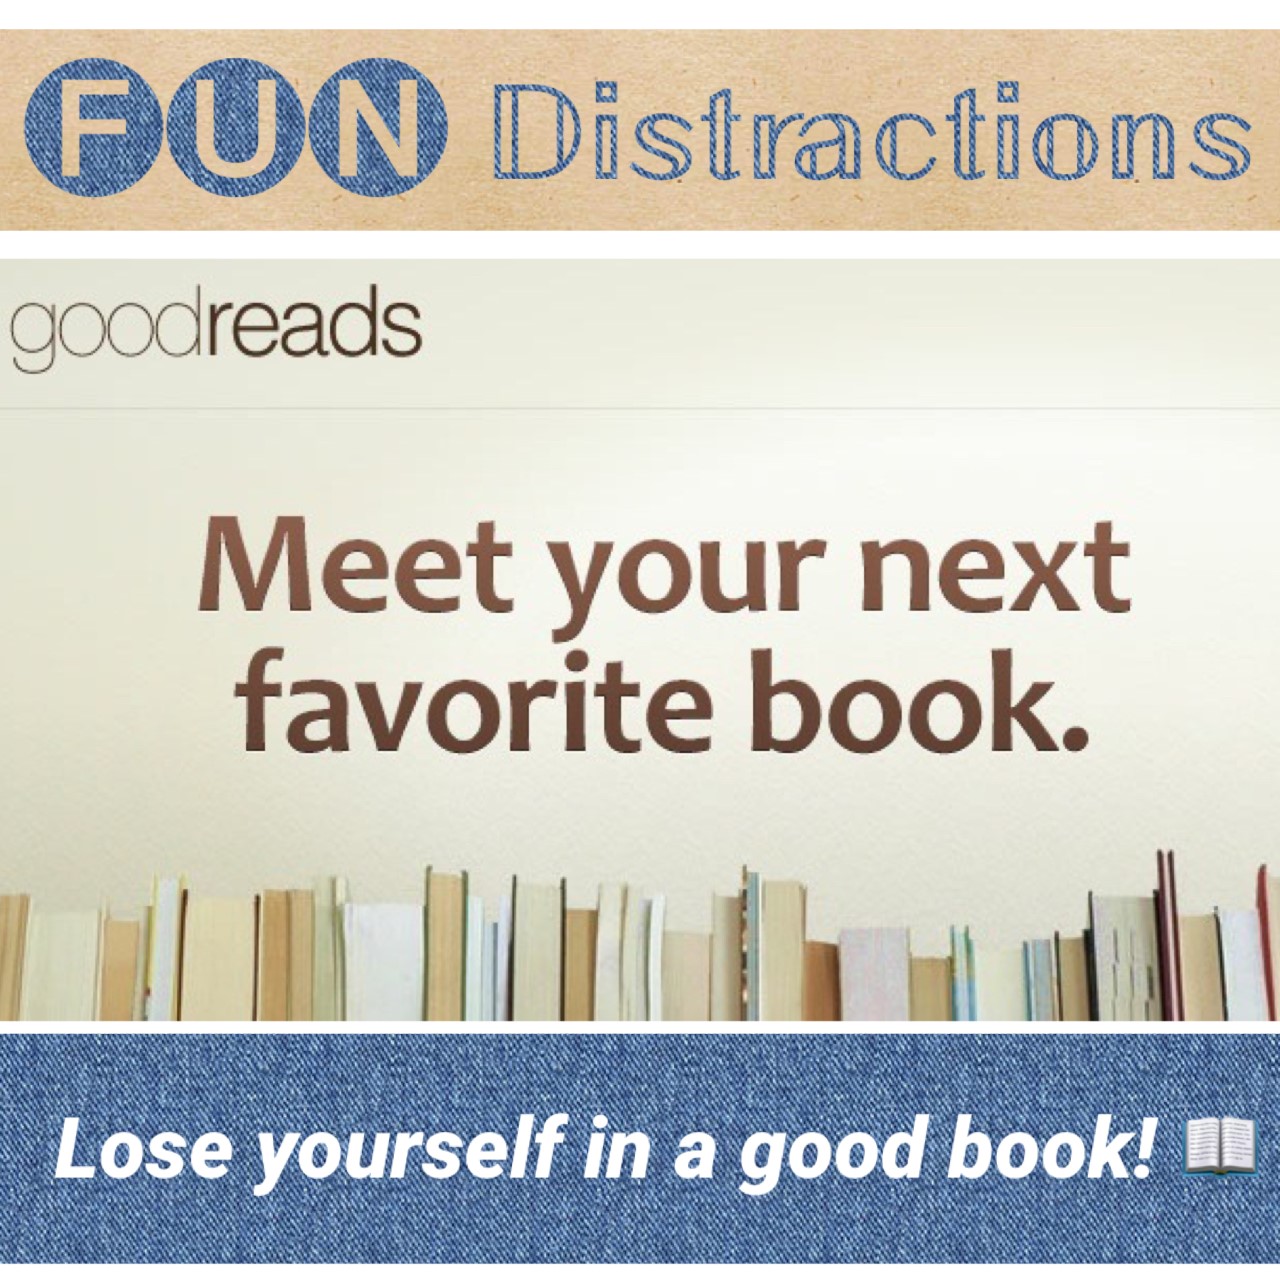 Image of row of books as an ad for Goodreads which states "Meet your next favorite book."